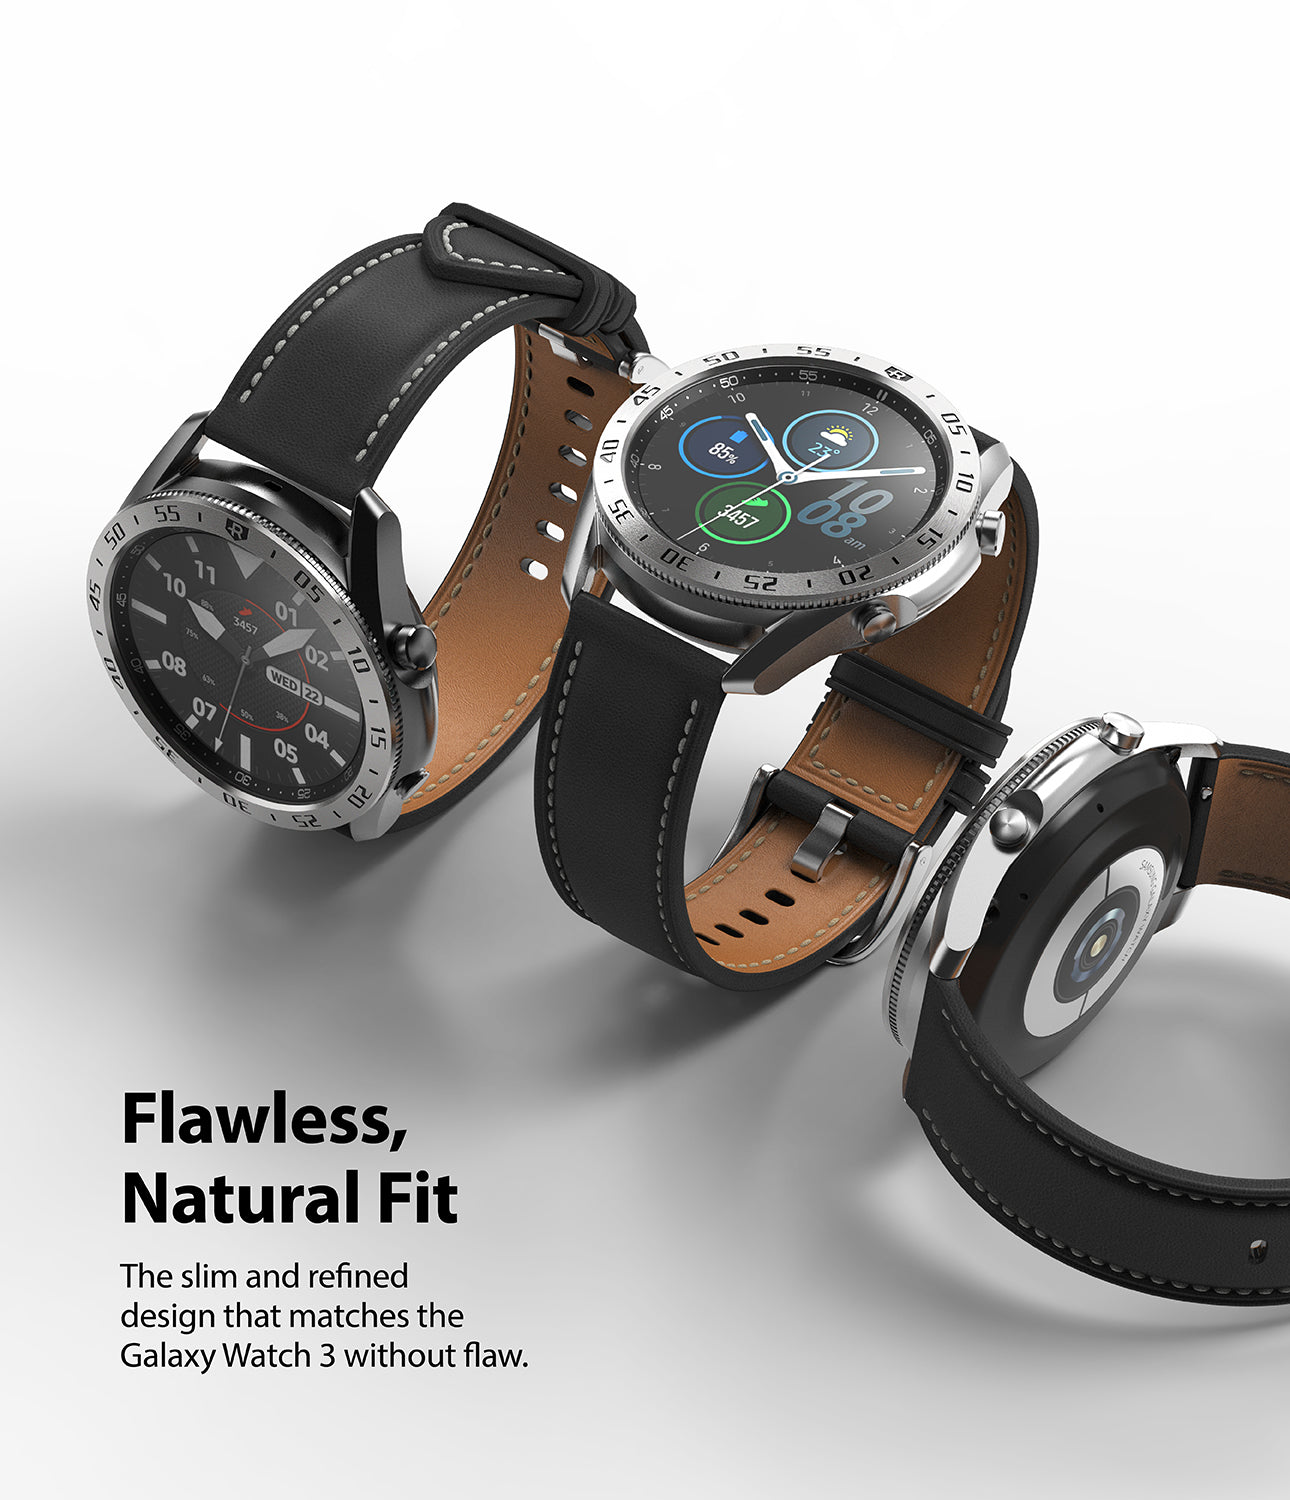 the slim and refined design that matches the galaxy watch 3 without flaw